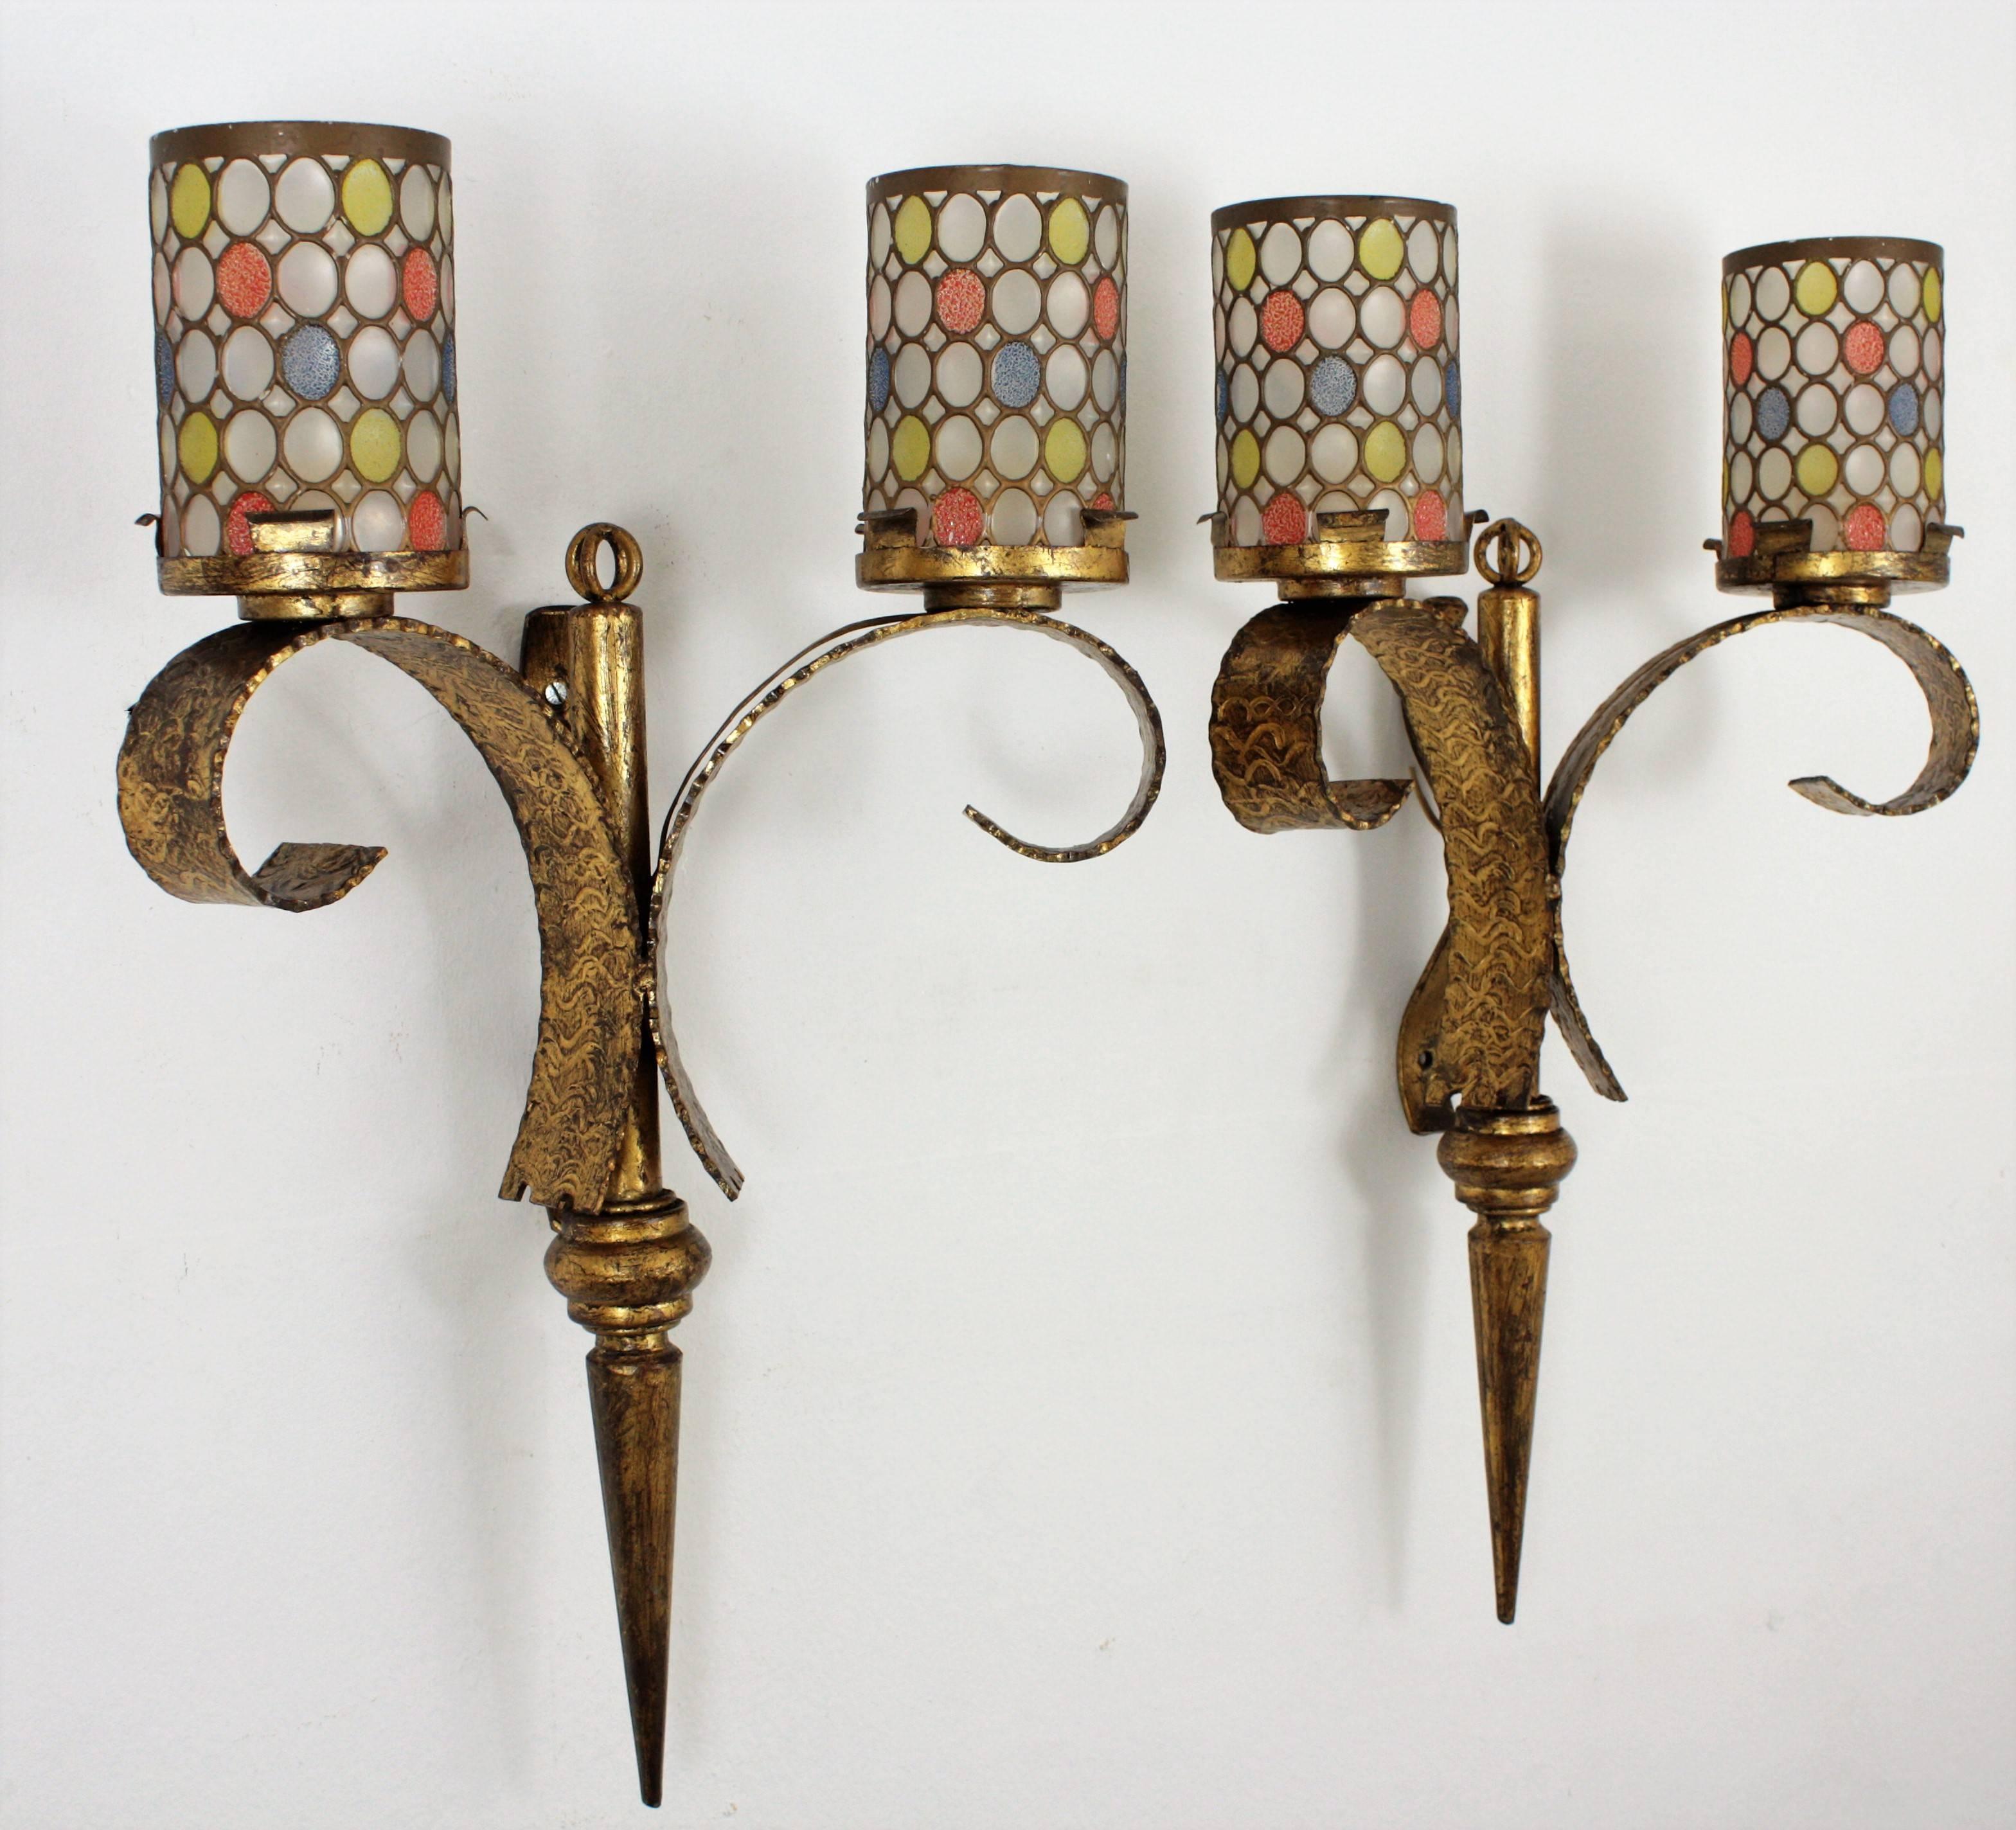 A pair of Hollywood Regency hand-hammered torch shaped gilt iron wall sconces with colorful glass shades with clear glass and yellow, blue and orange accents and two lights, 
Spain, 1940s-1950s.

Dimensions shown are per piece.